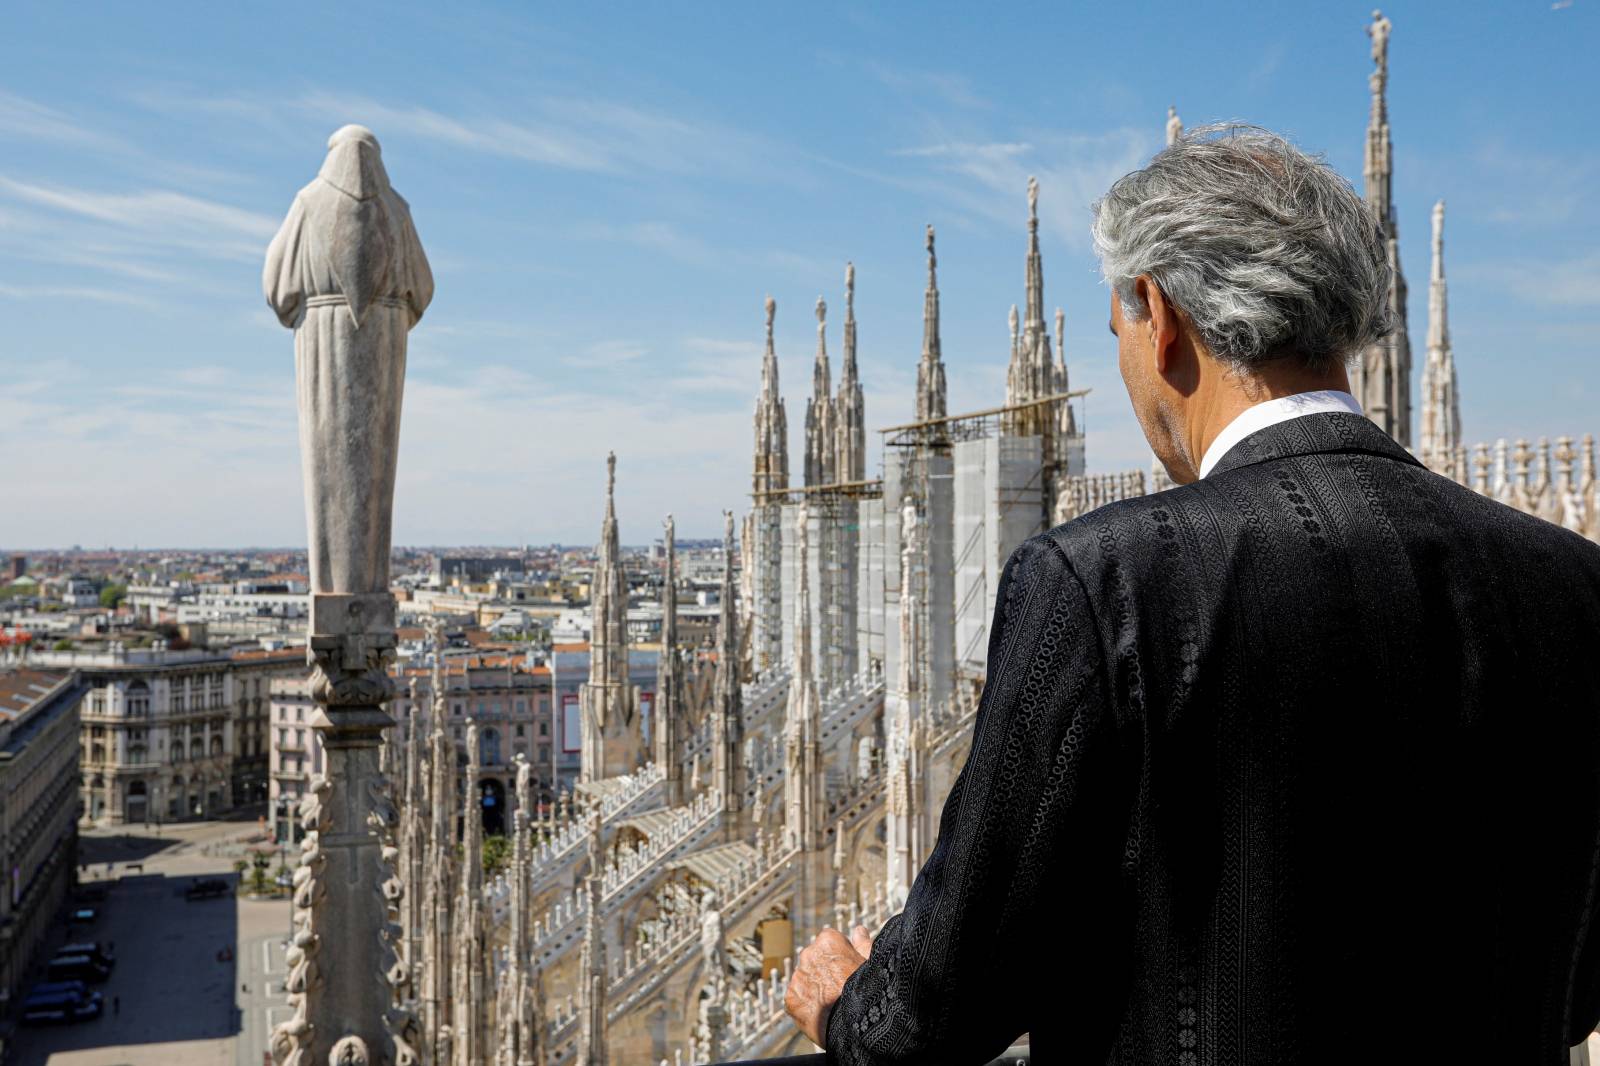 Italian opera singer Andrea Bocelli participates in ''Music for hope'' event at an empty Duomo Cathedral in Milan